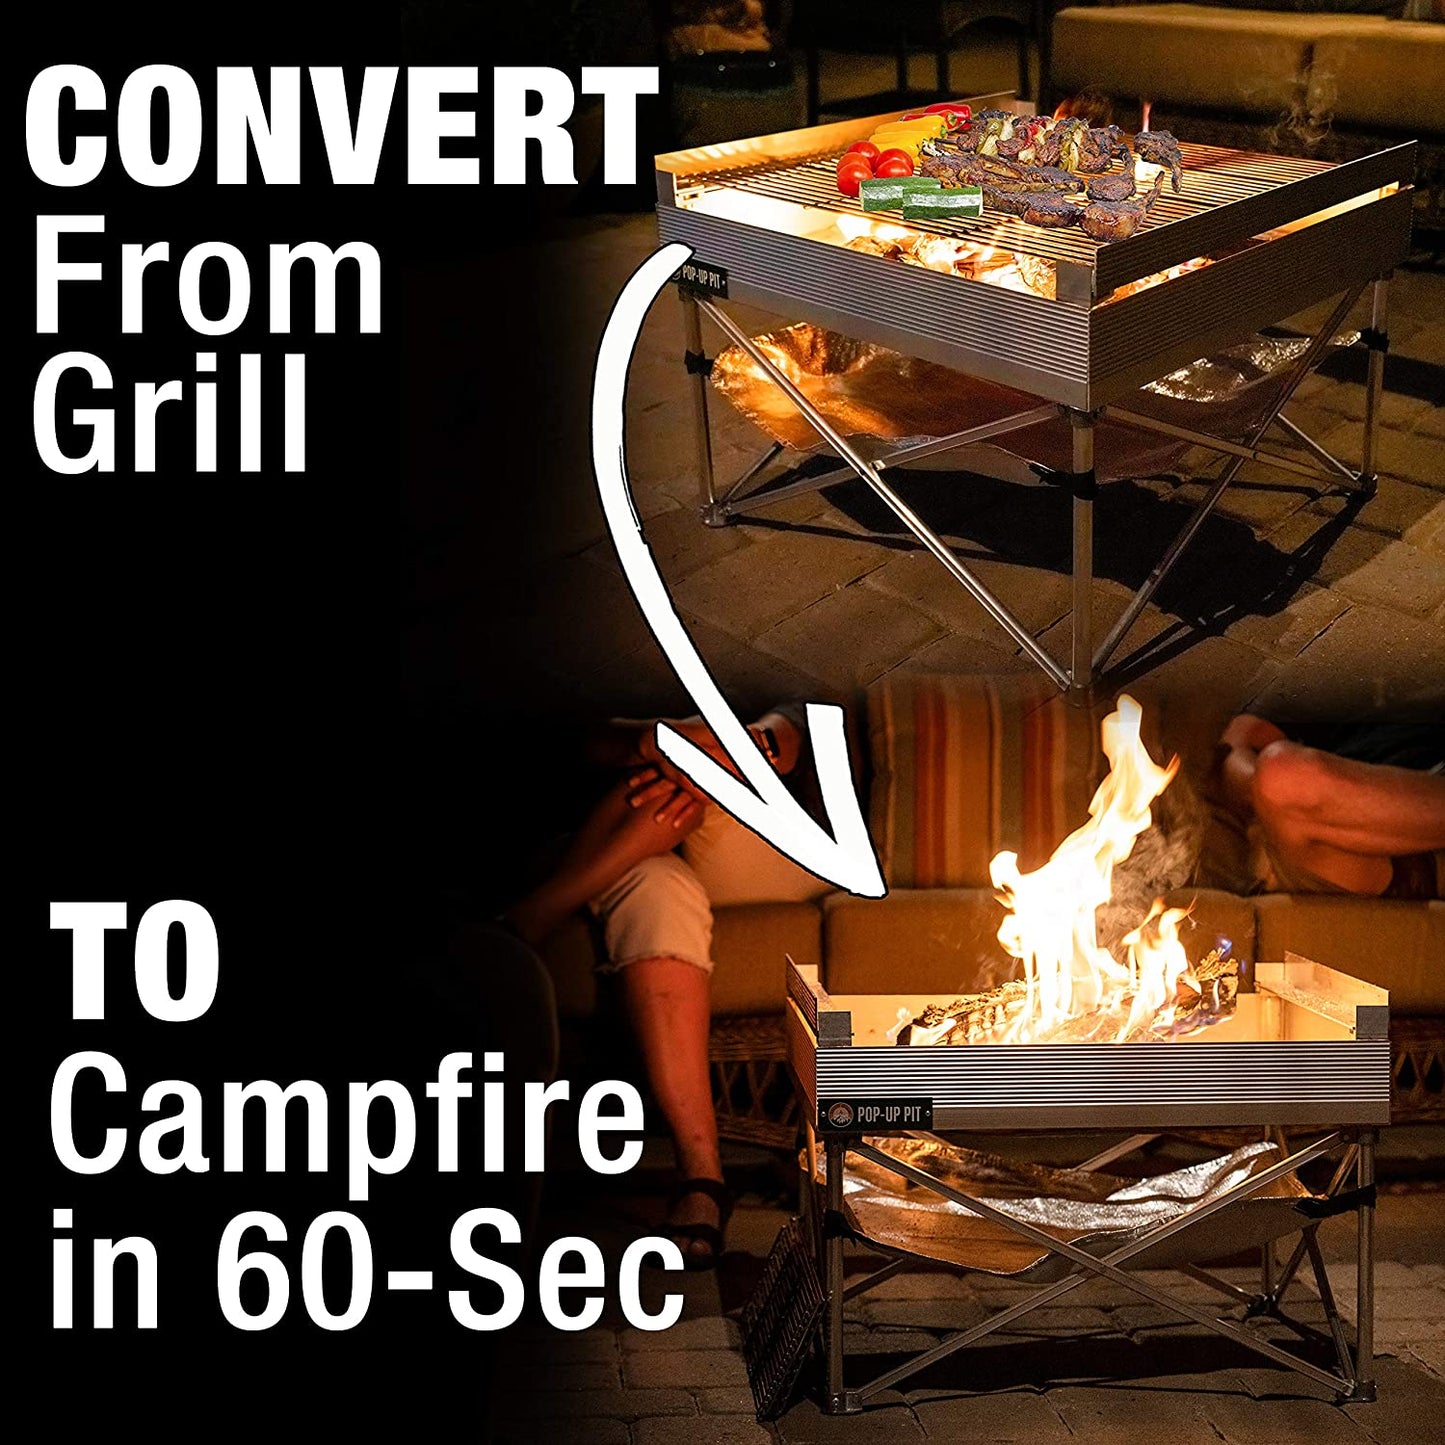 Pop-Up Pit, Heat Shield and Quad-Fold Grill Grate (CB004)